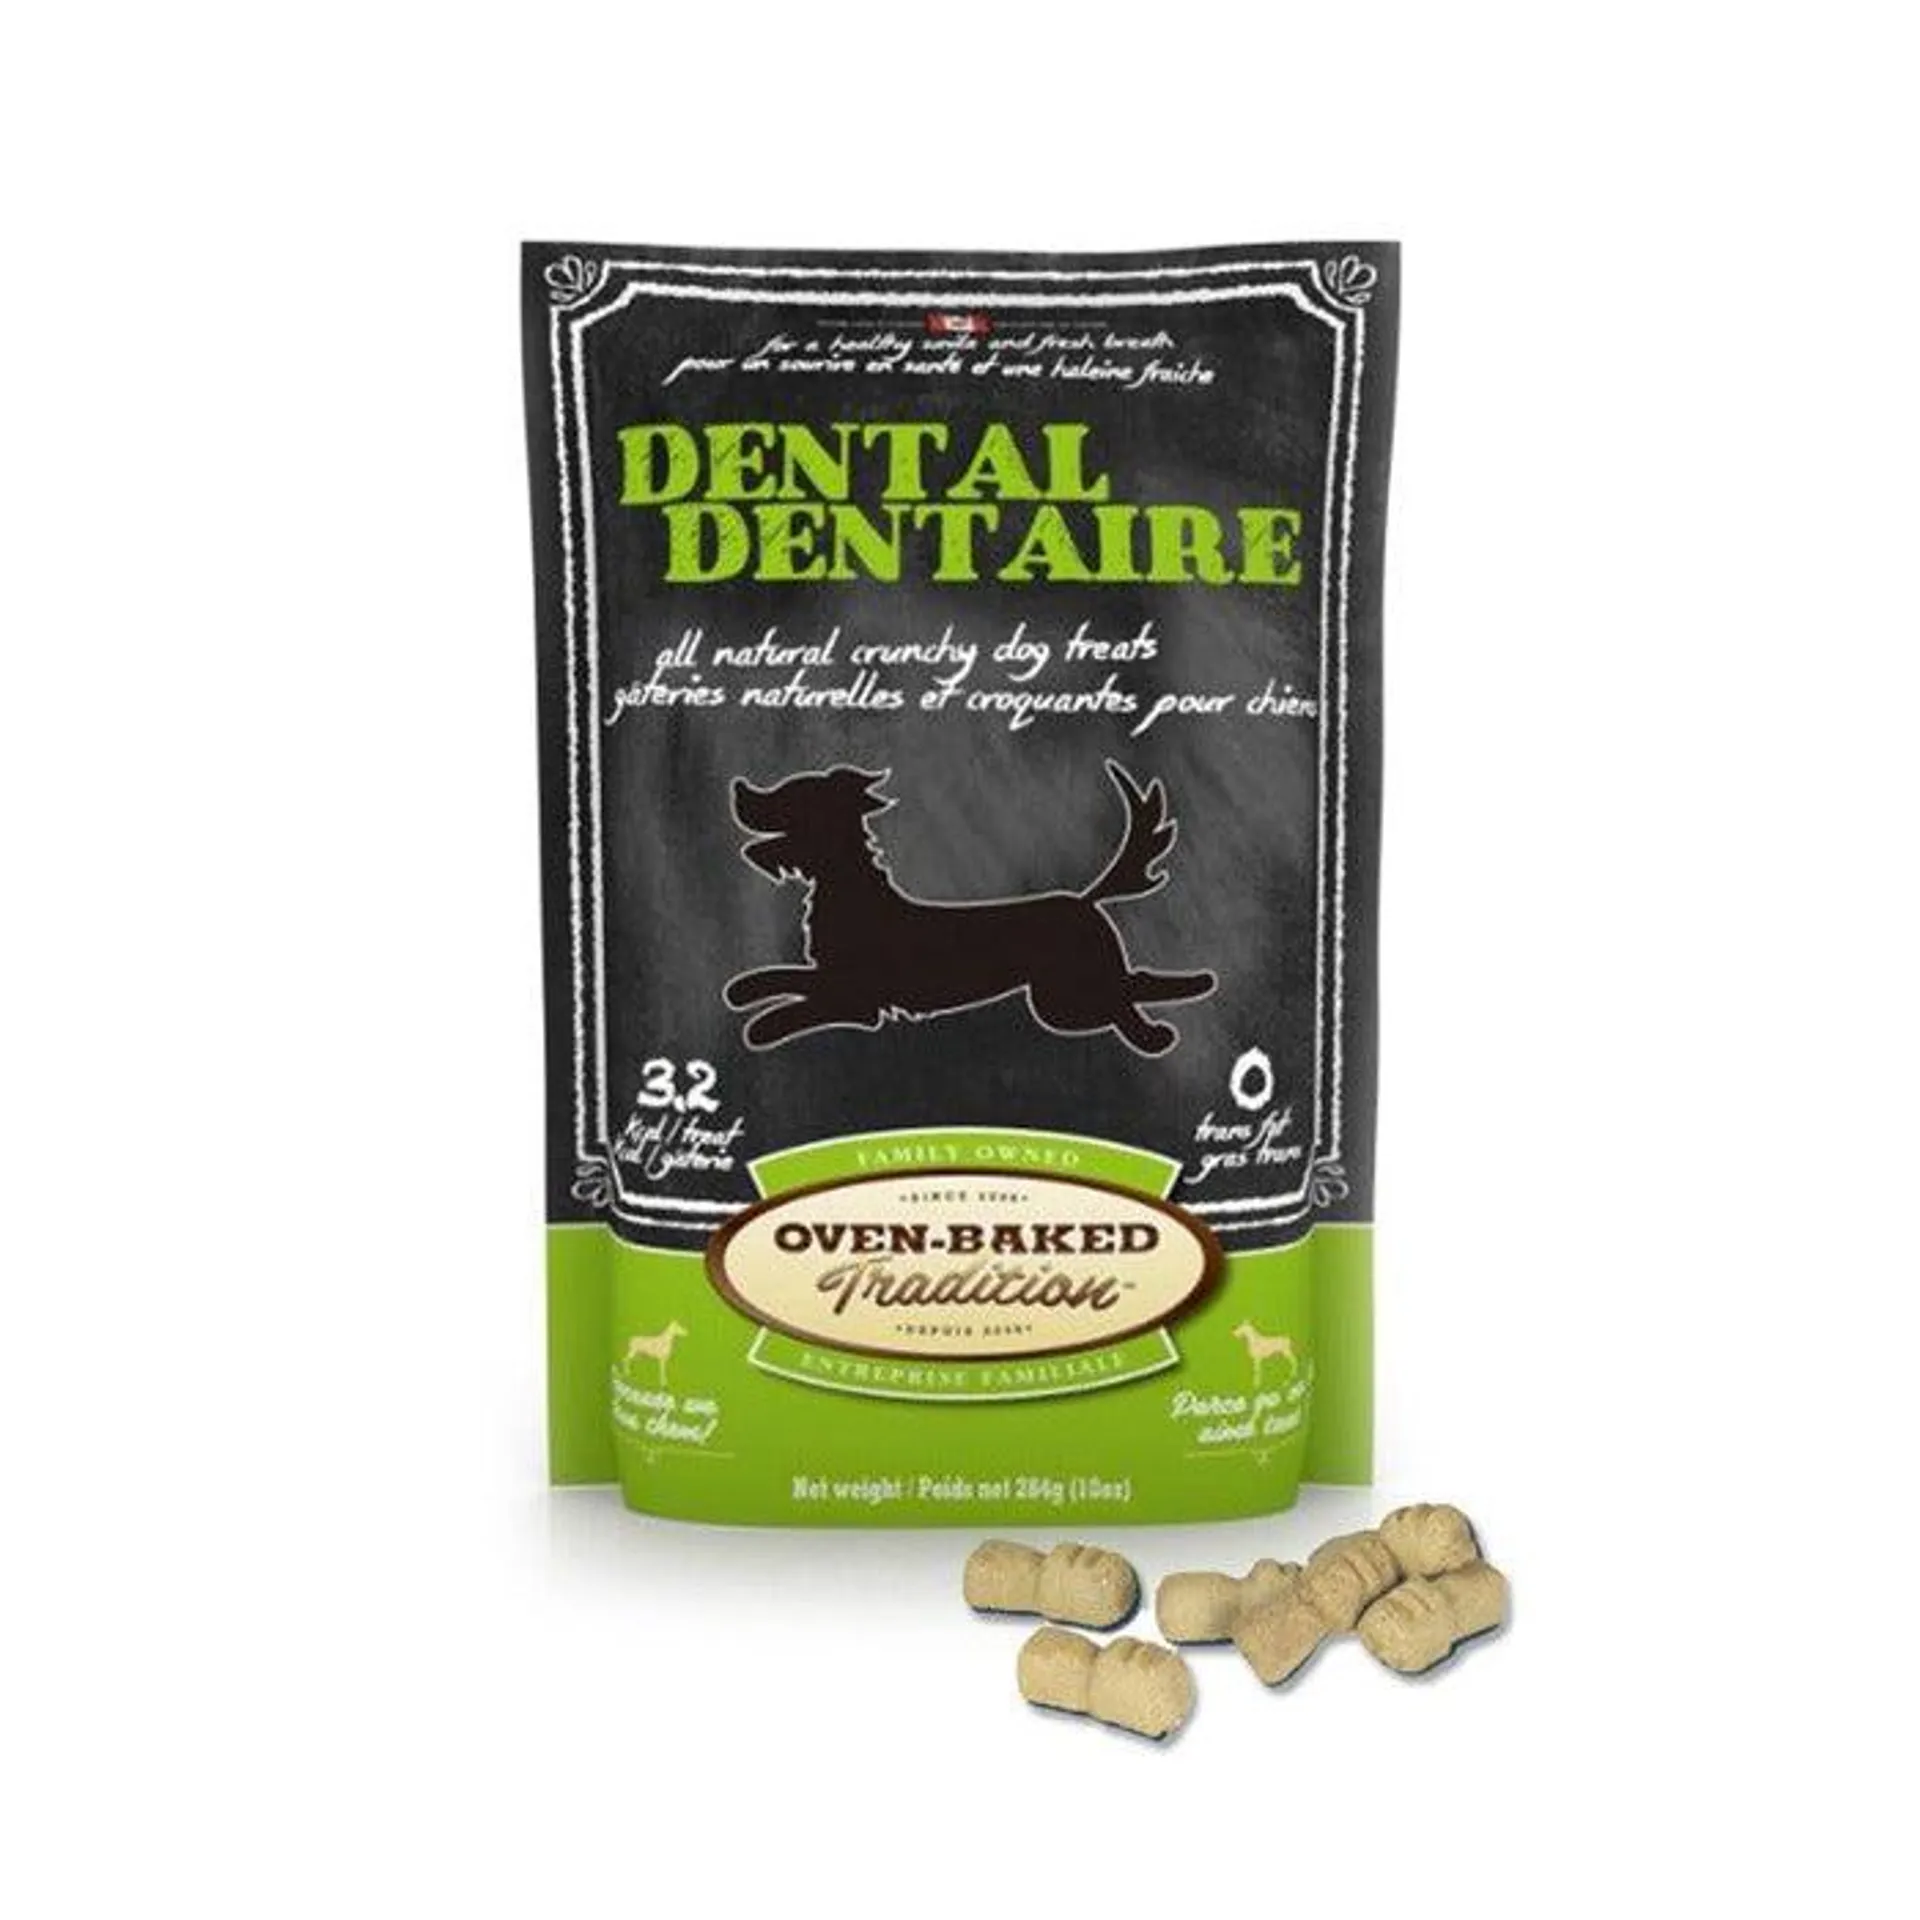 Oven-Baked Tradition chuches dentales para perros 283,5 gr